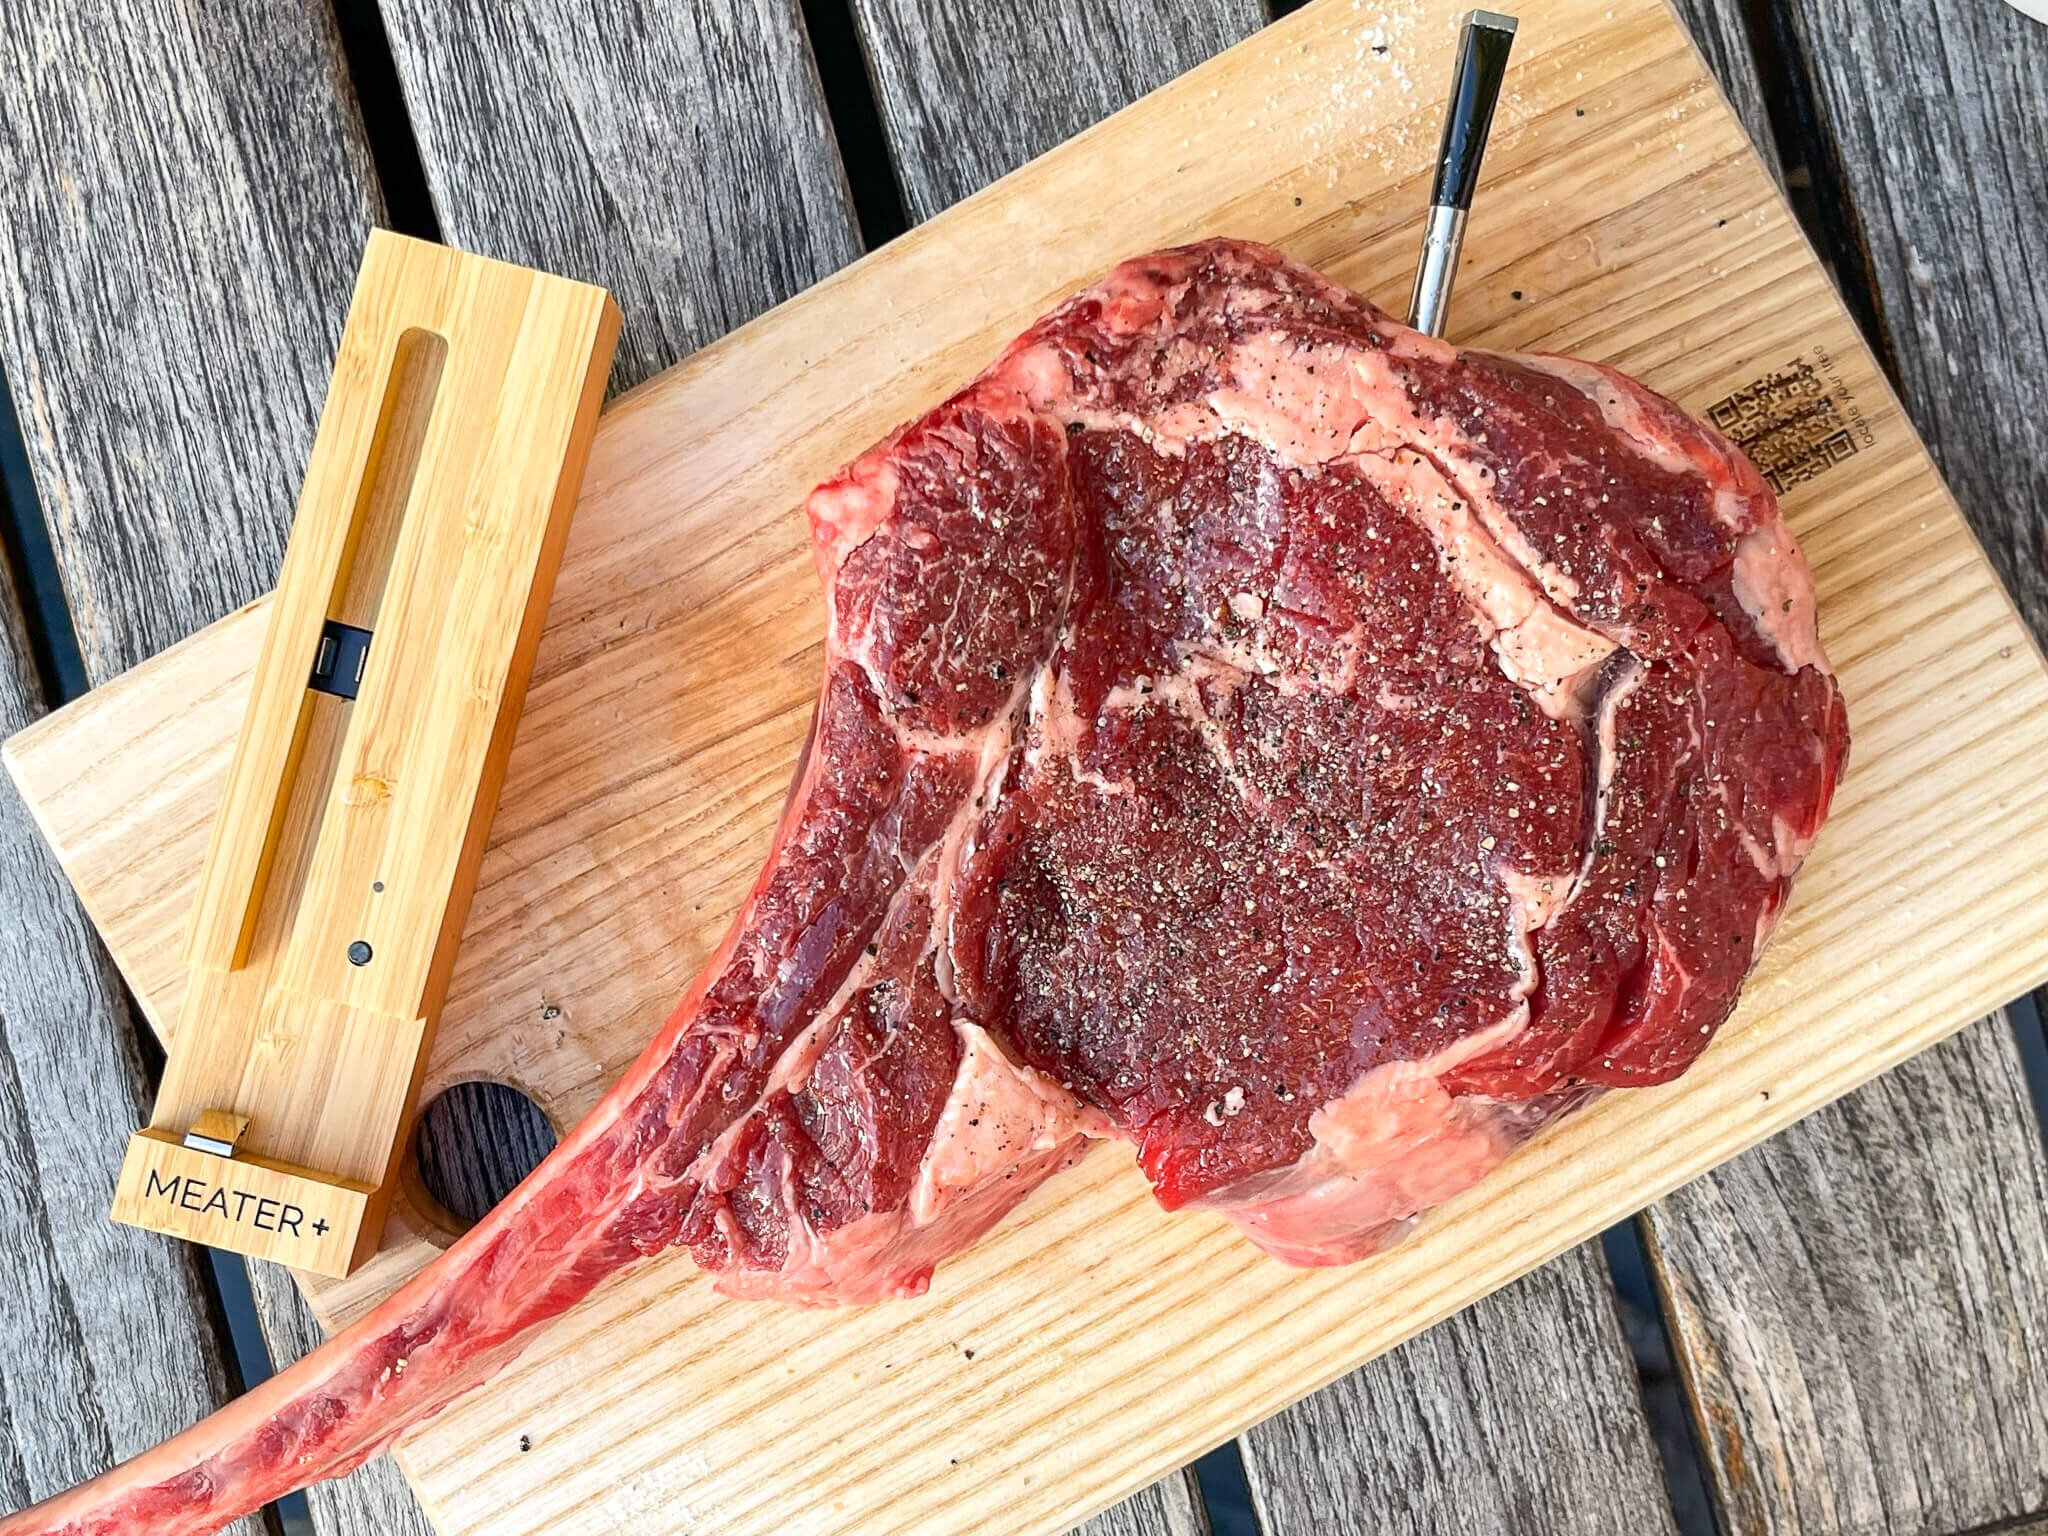 With MEATER Link, The Best Wireless Meat Thermometer Gets Even Better  Thanks To WiFi Connectivity - MEATER Blog